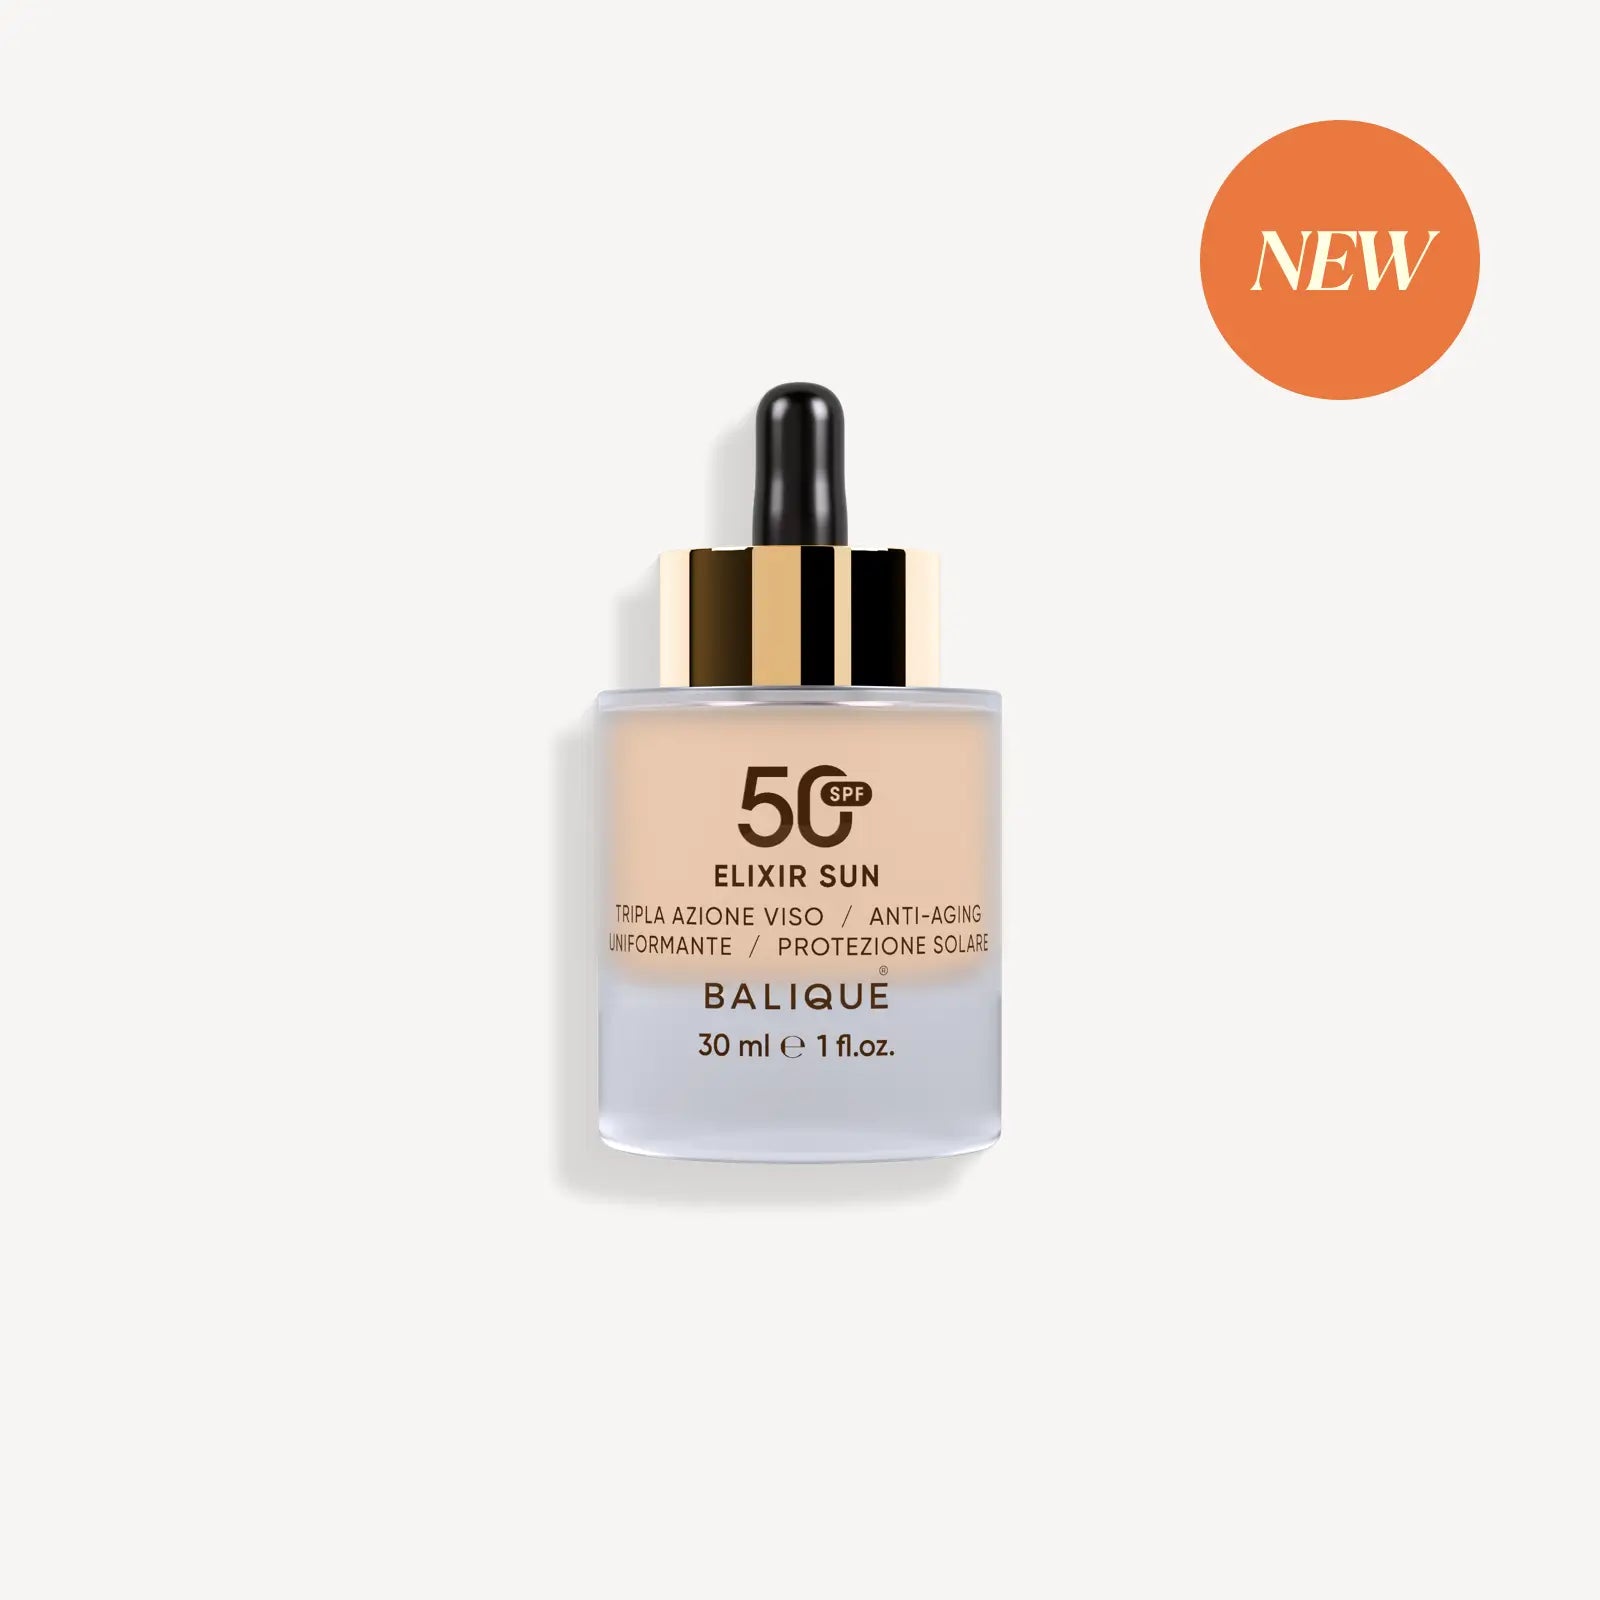 ELIXIR SUN SPF50 - Triple action face serum: Anti-aging, uniform, protects from the sun - 30ml 